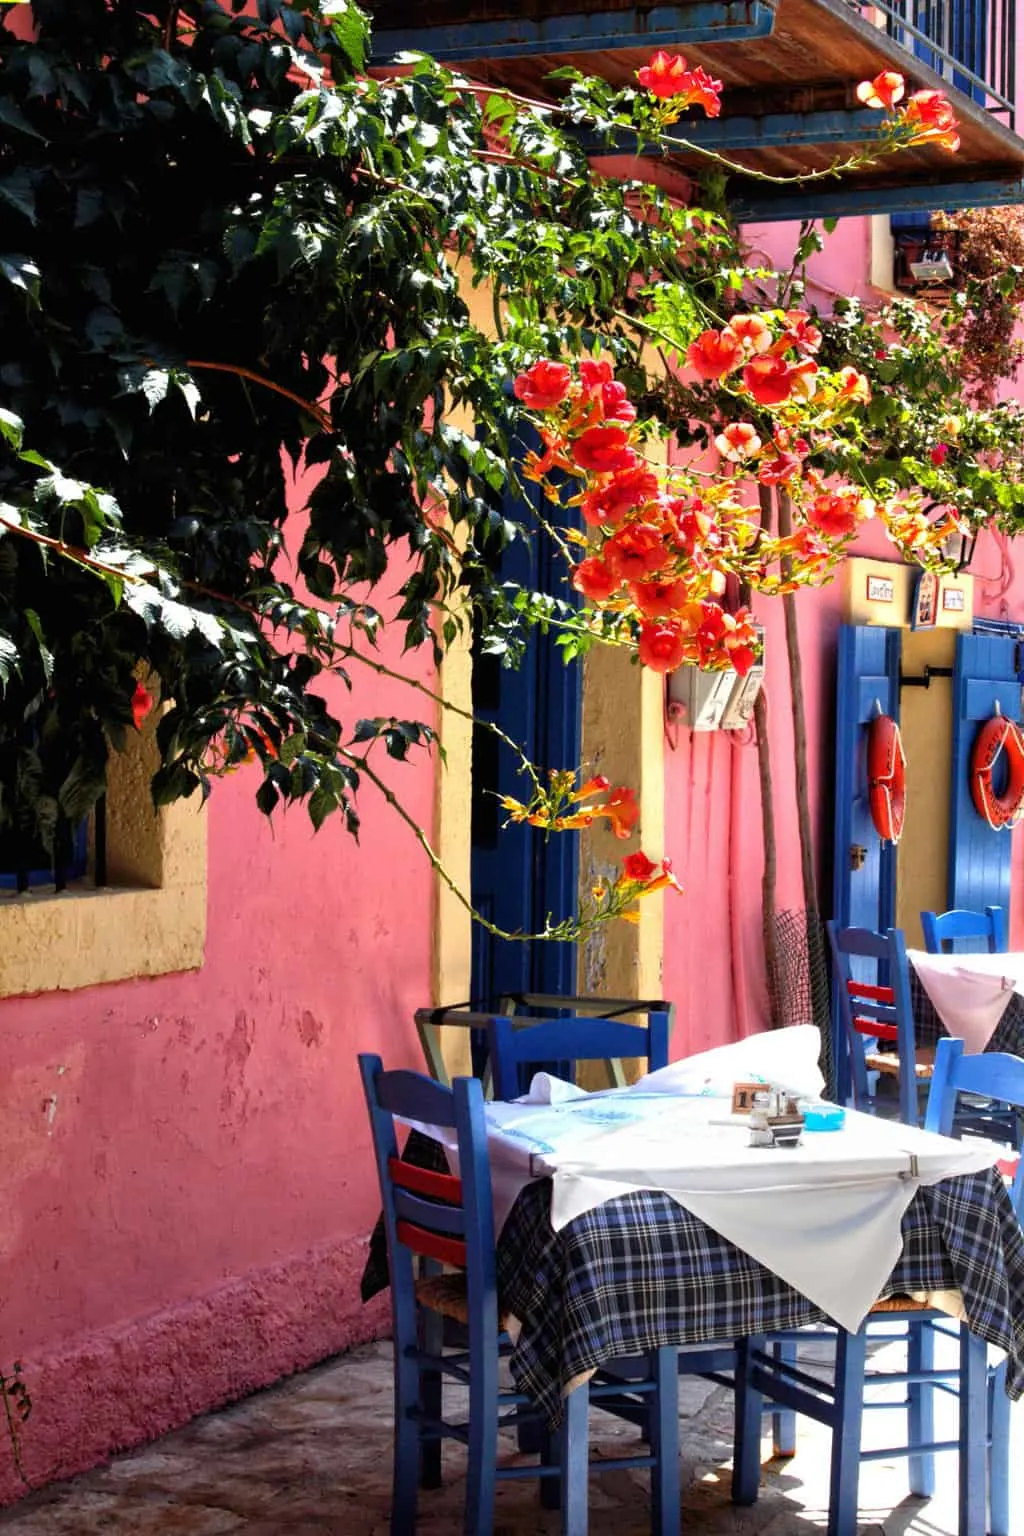 Typical Greek restaurant table outside a bright pink building with pink flowers hanging over the wall.